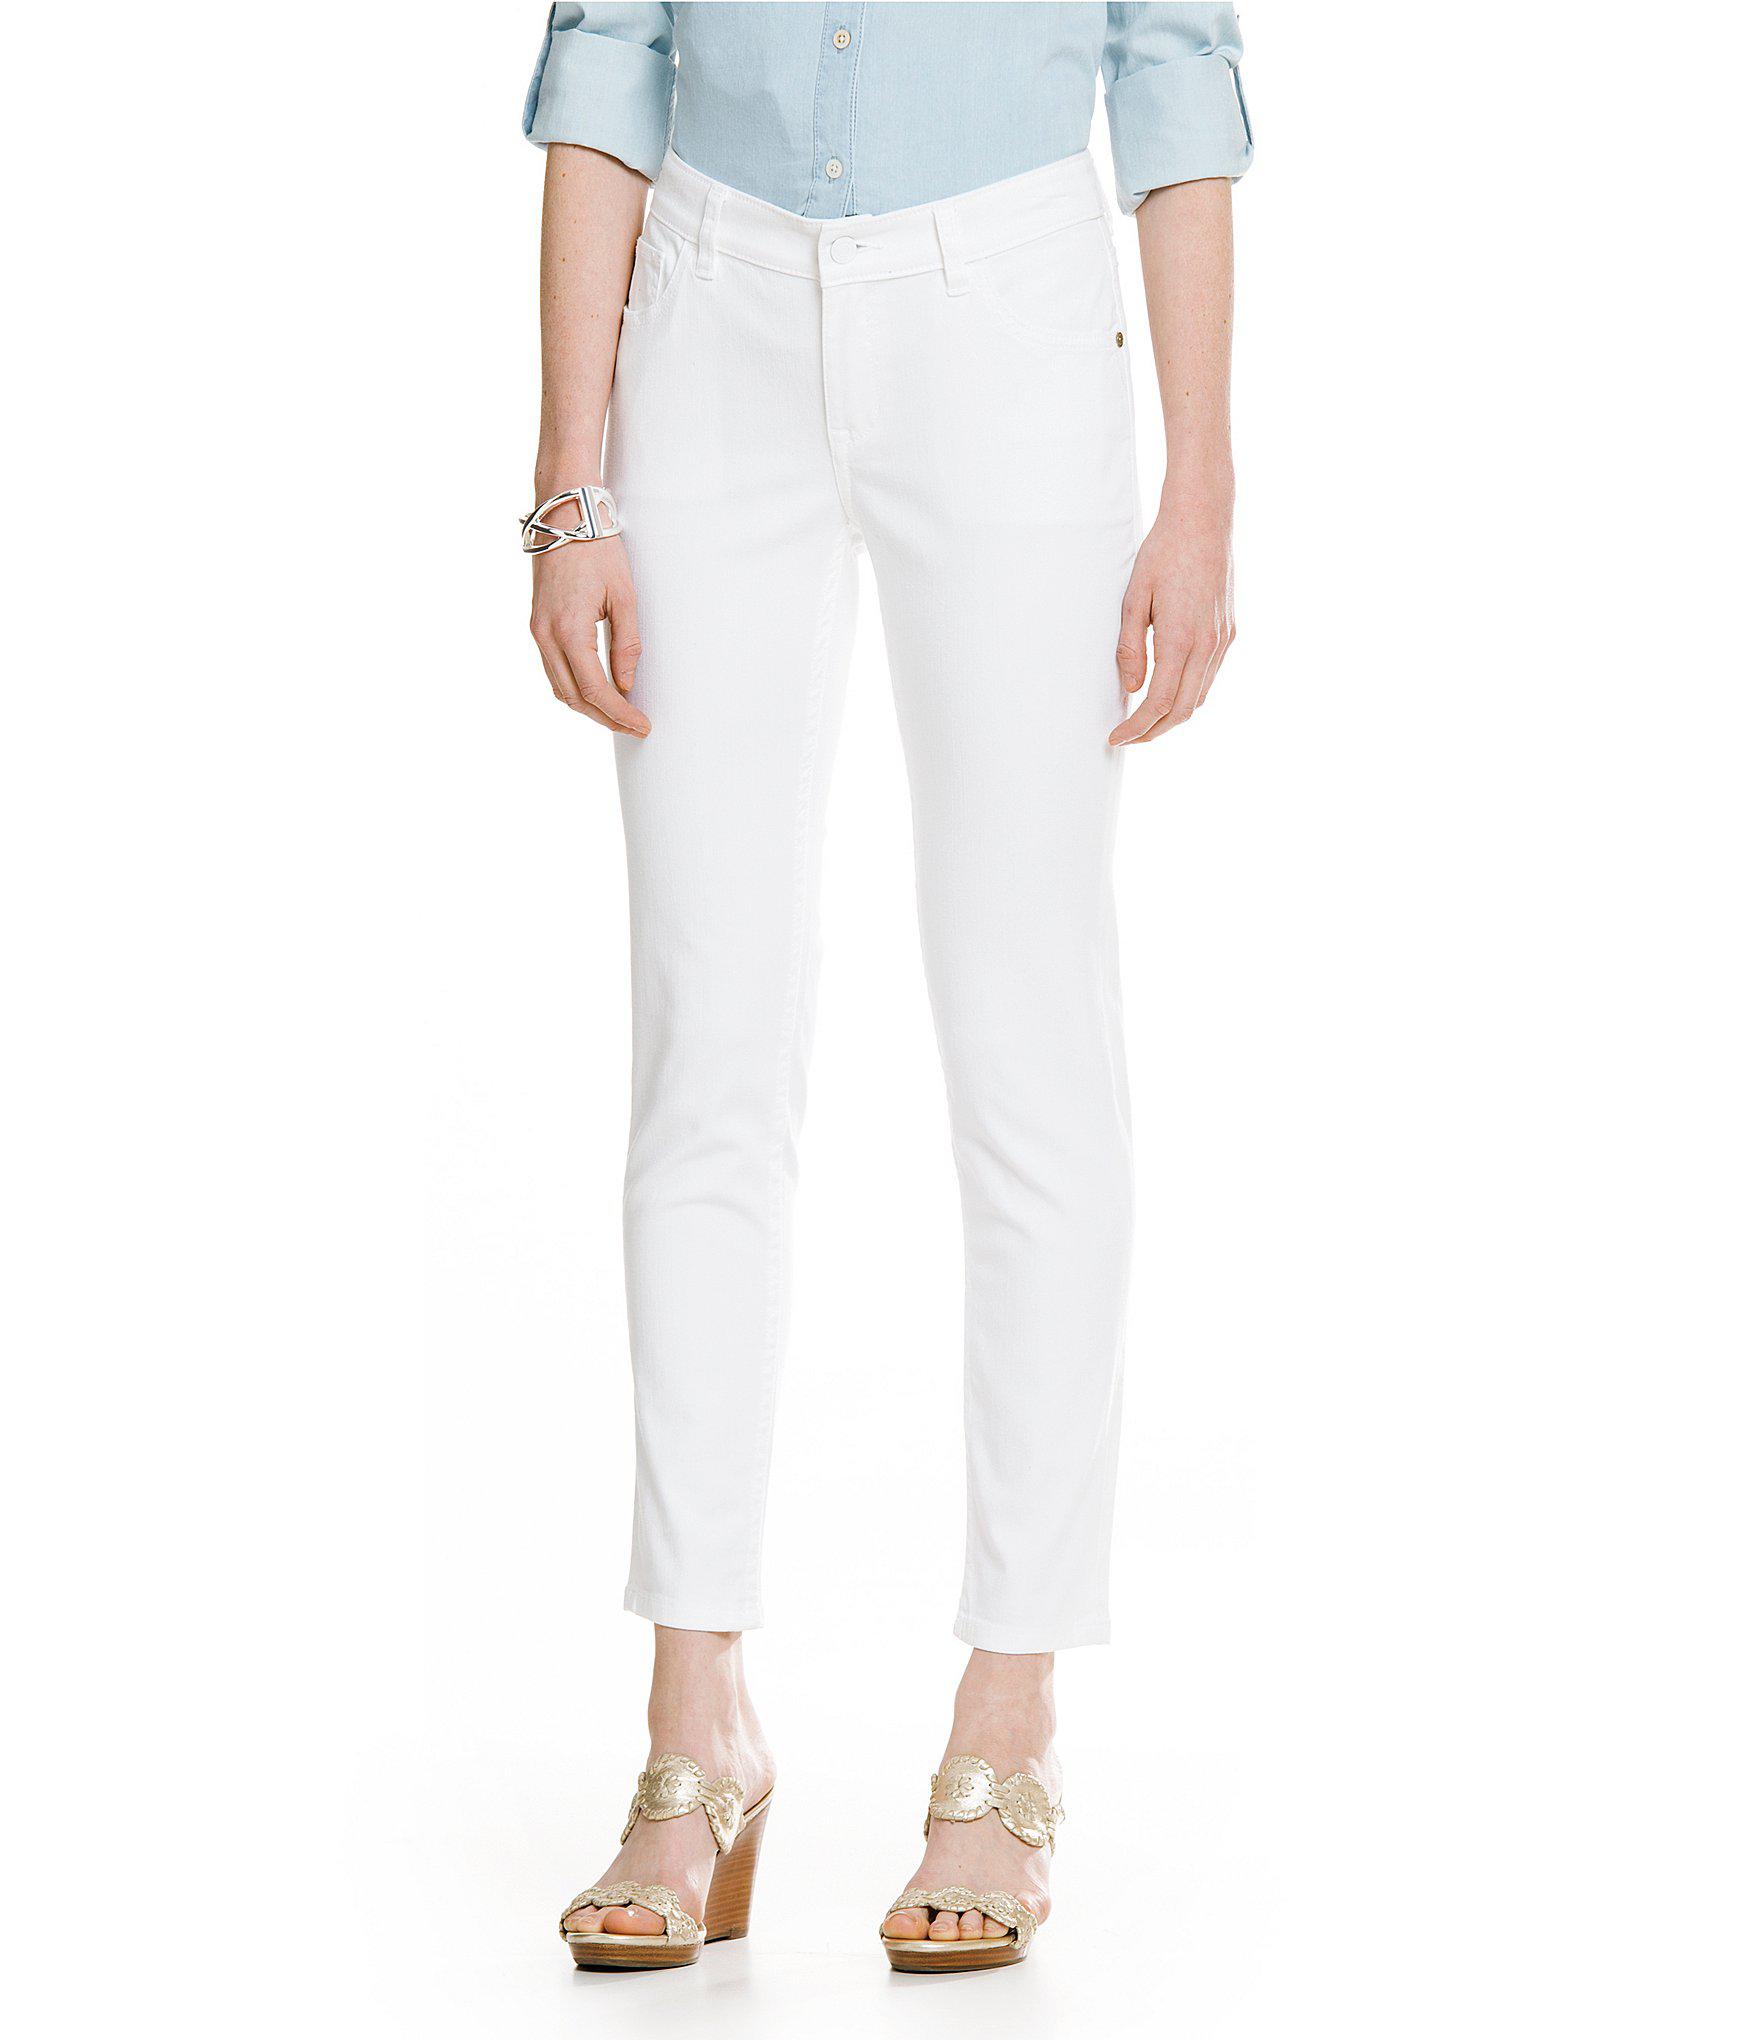 Lyst - Tommy Bahama Ana Twill Ankle Pants in White